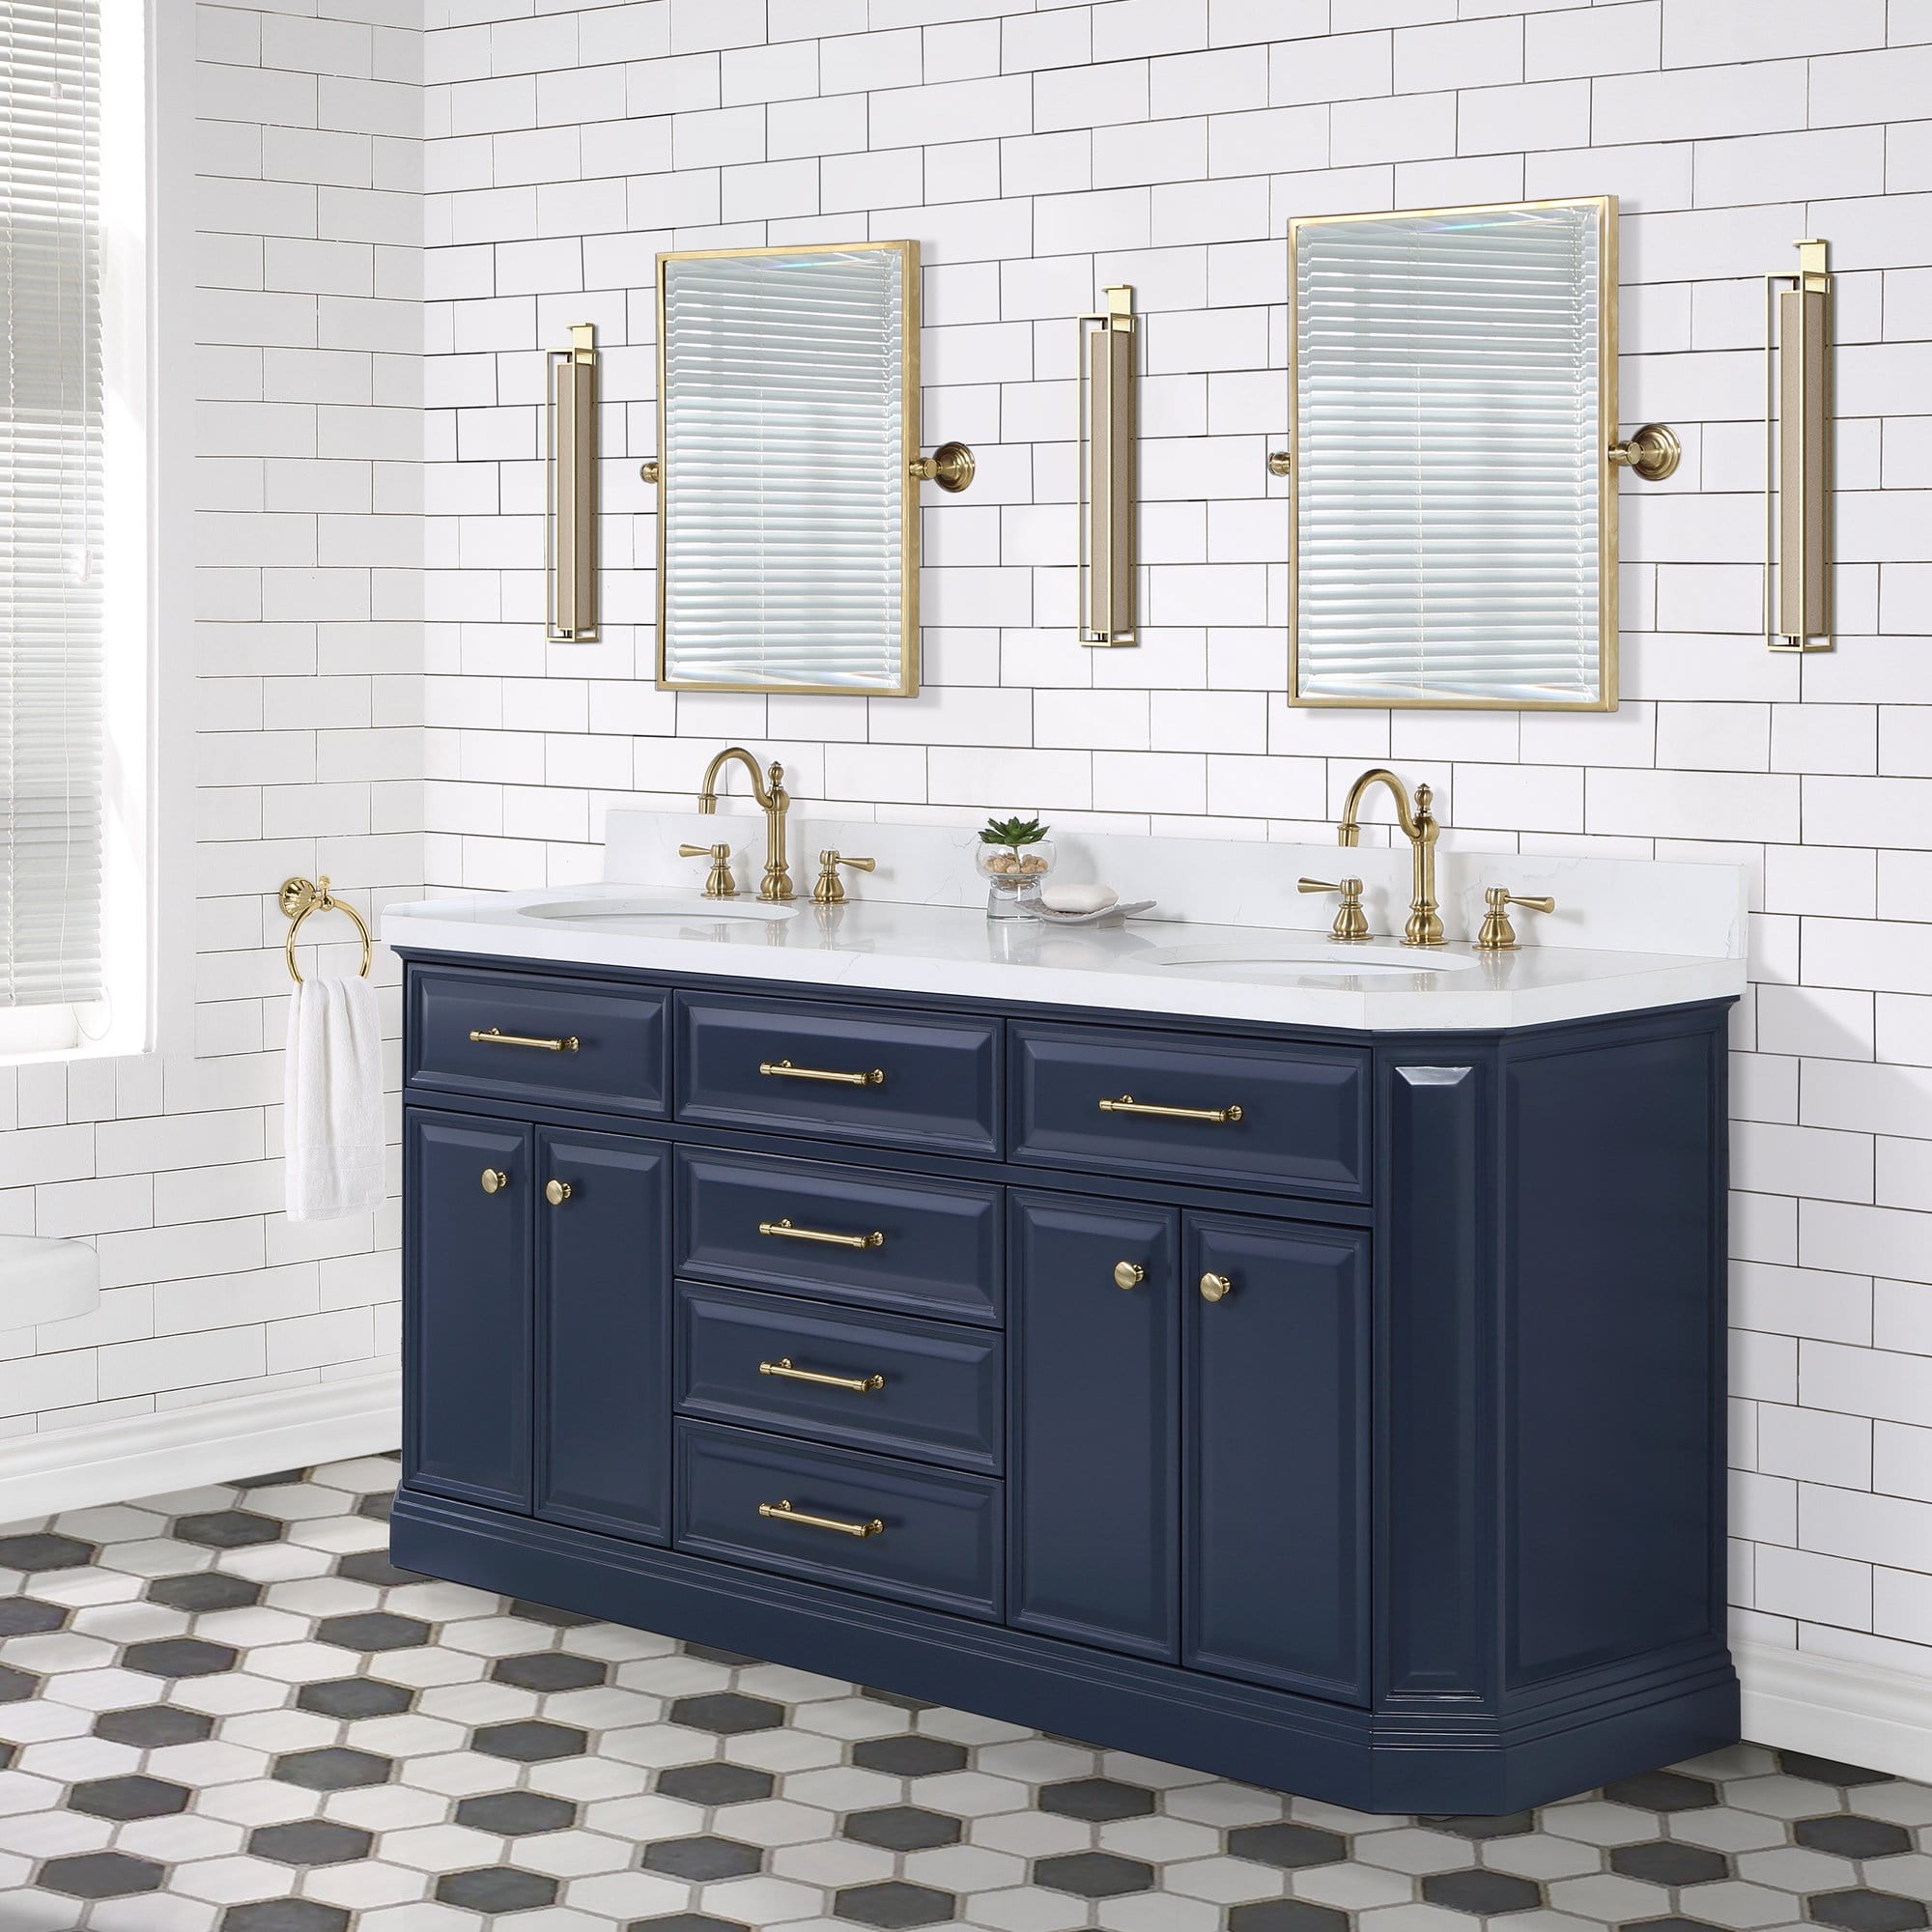 Water Creation Palace 72 In. Double Sink White Quartz Countertop Vanity in Monarch Blue with Hook Faucets - Molaix732030765054Bathroom vanityPA72QZ06MB-000TL1206